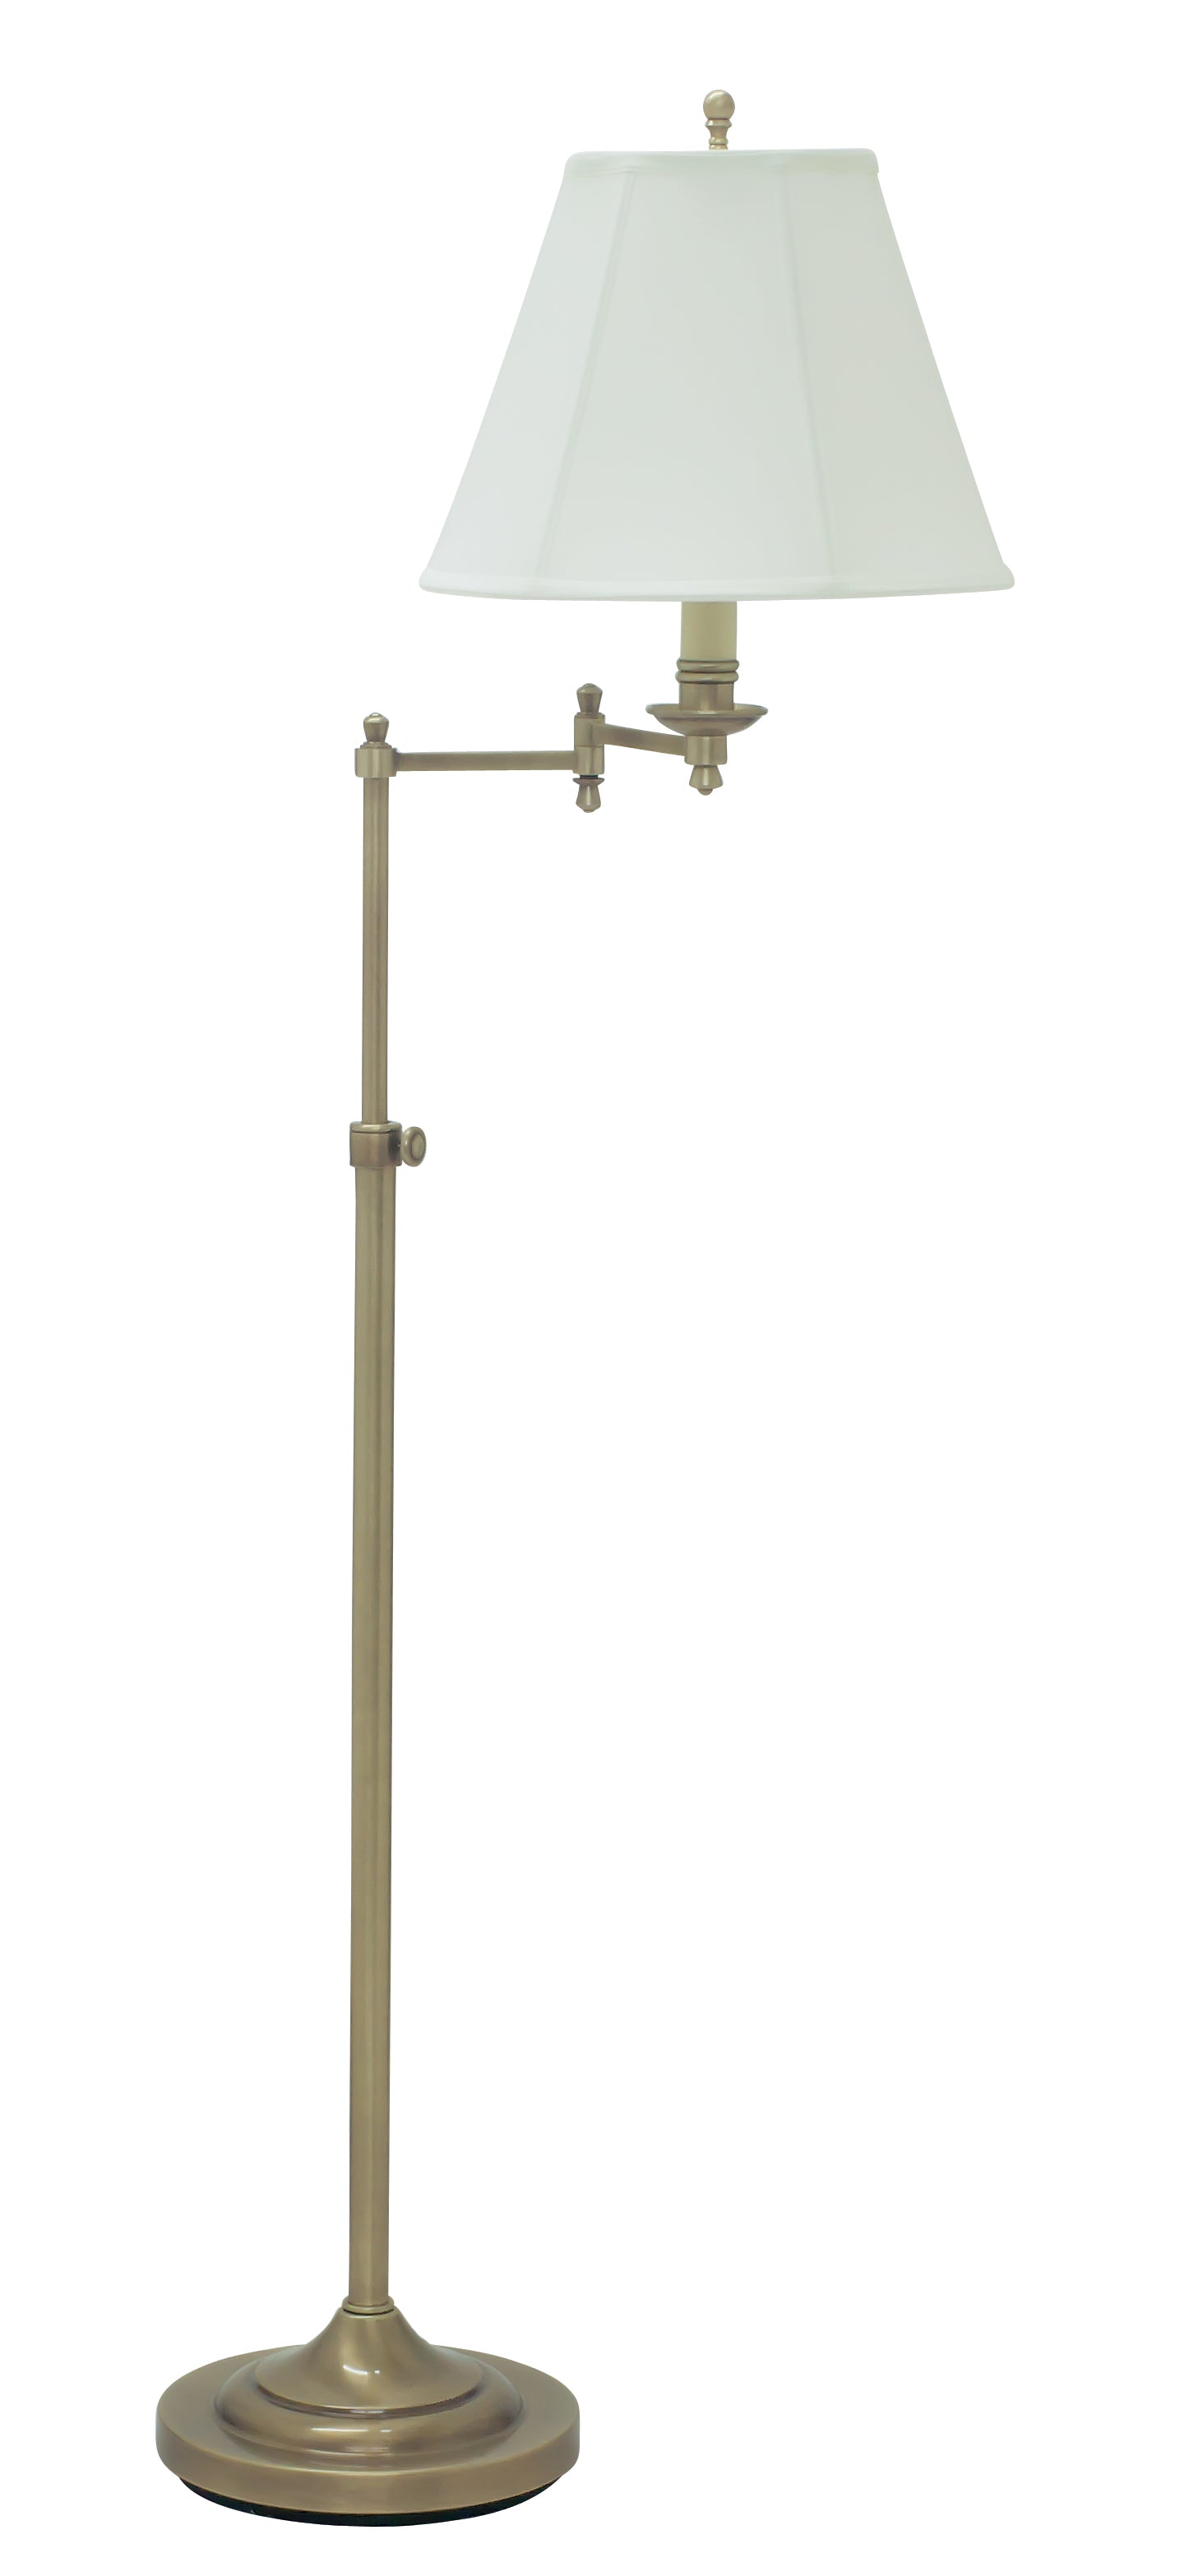 House of Troy Club Adjustable Antique Brass Floor Lamp CL200-AB